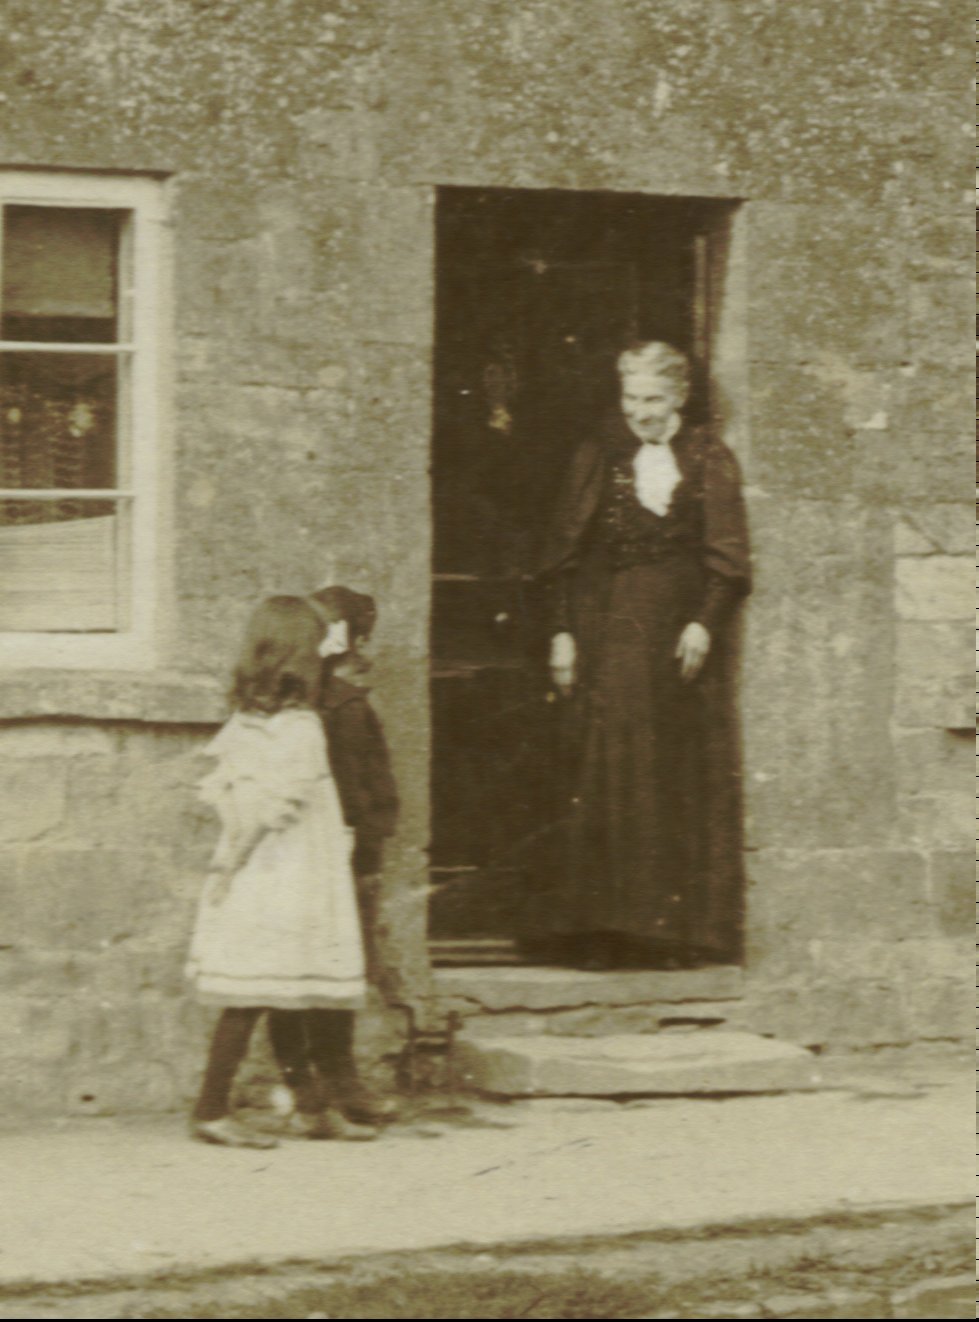 Rebecca Ann (DAY) STOKES with her grandchildren Ralph and Dolly EDWARDS in about 1906